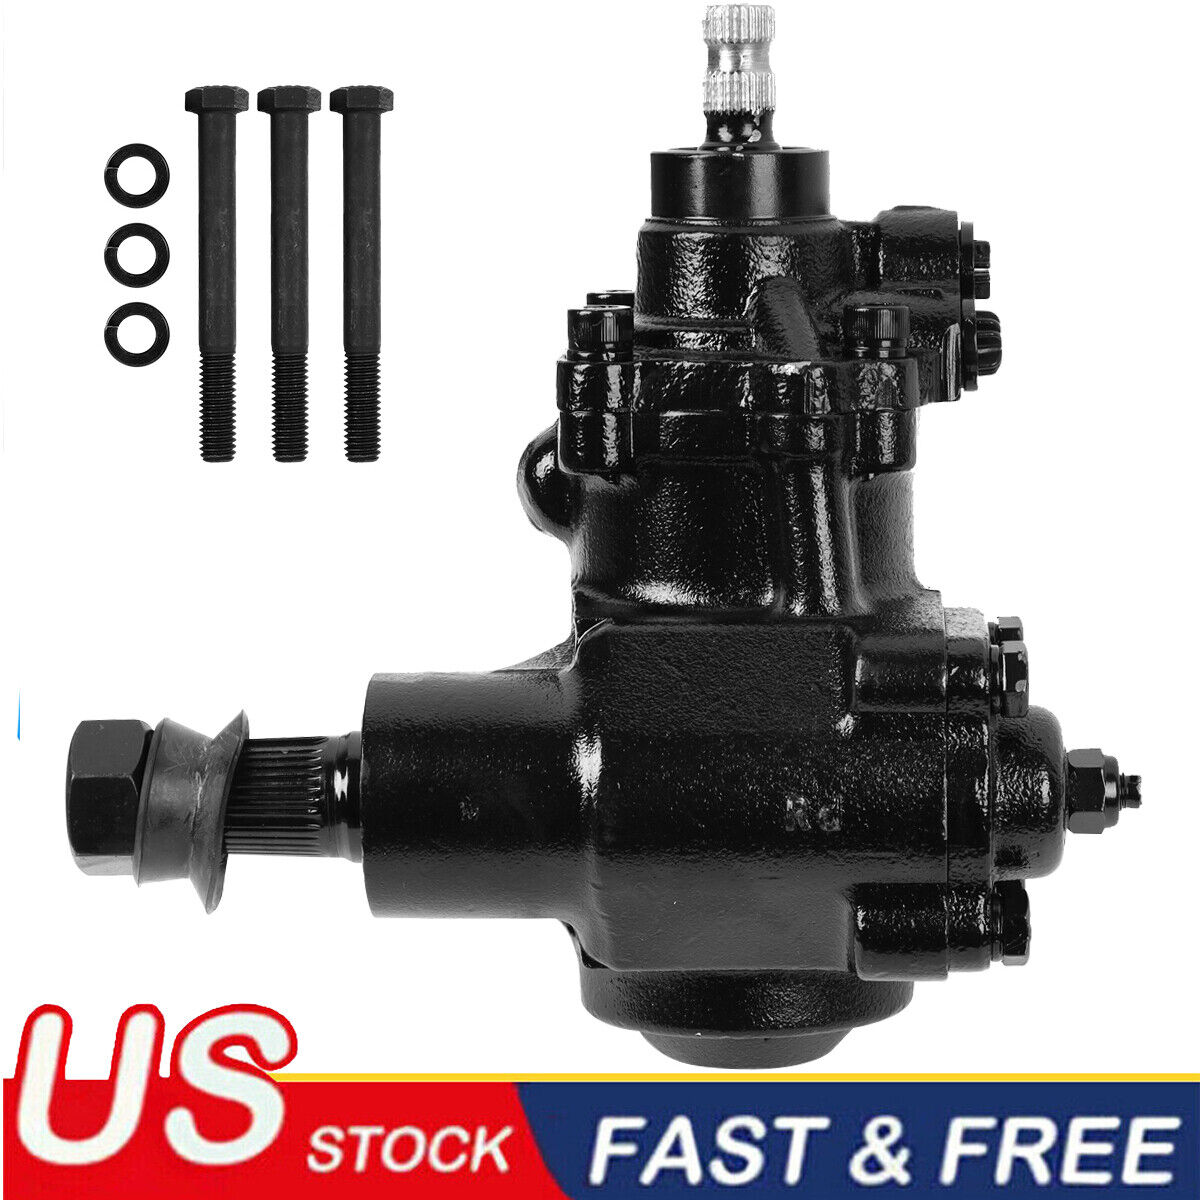 For 1958-64 Chevy Impala Bel Air 500 Series Quick Ratio Power Steering Gear Box